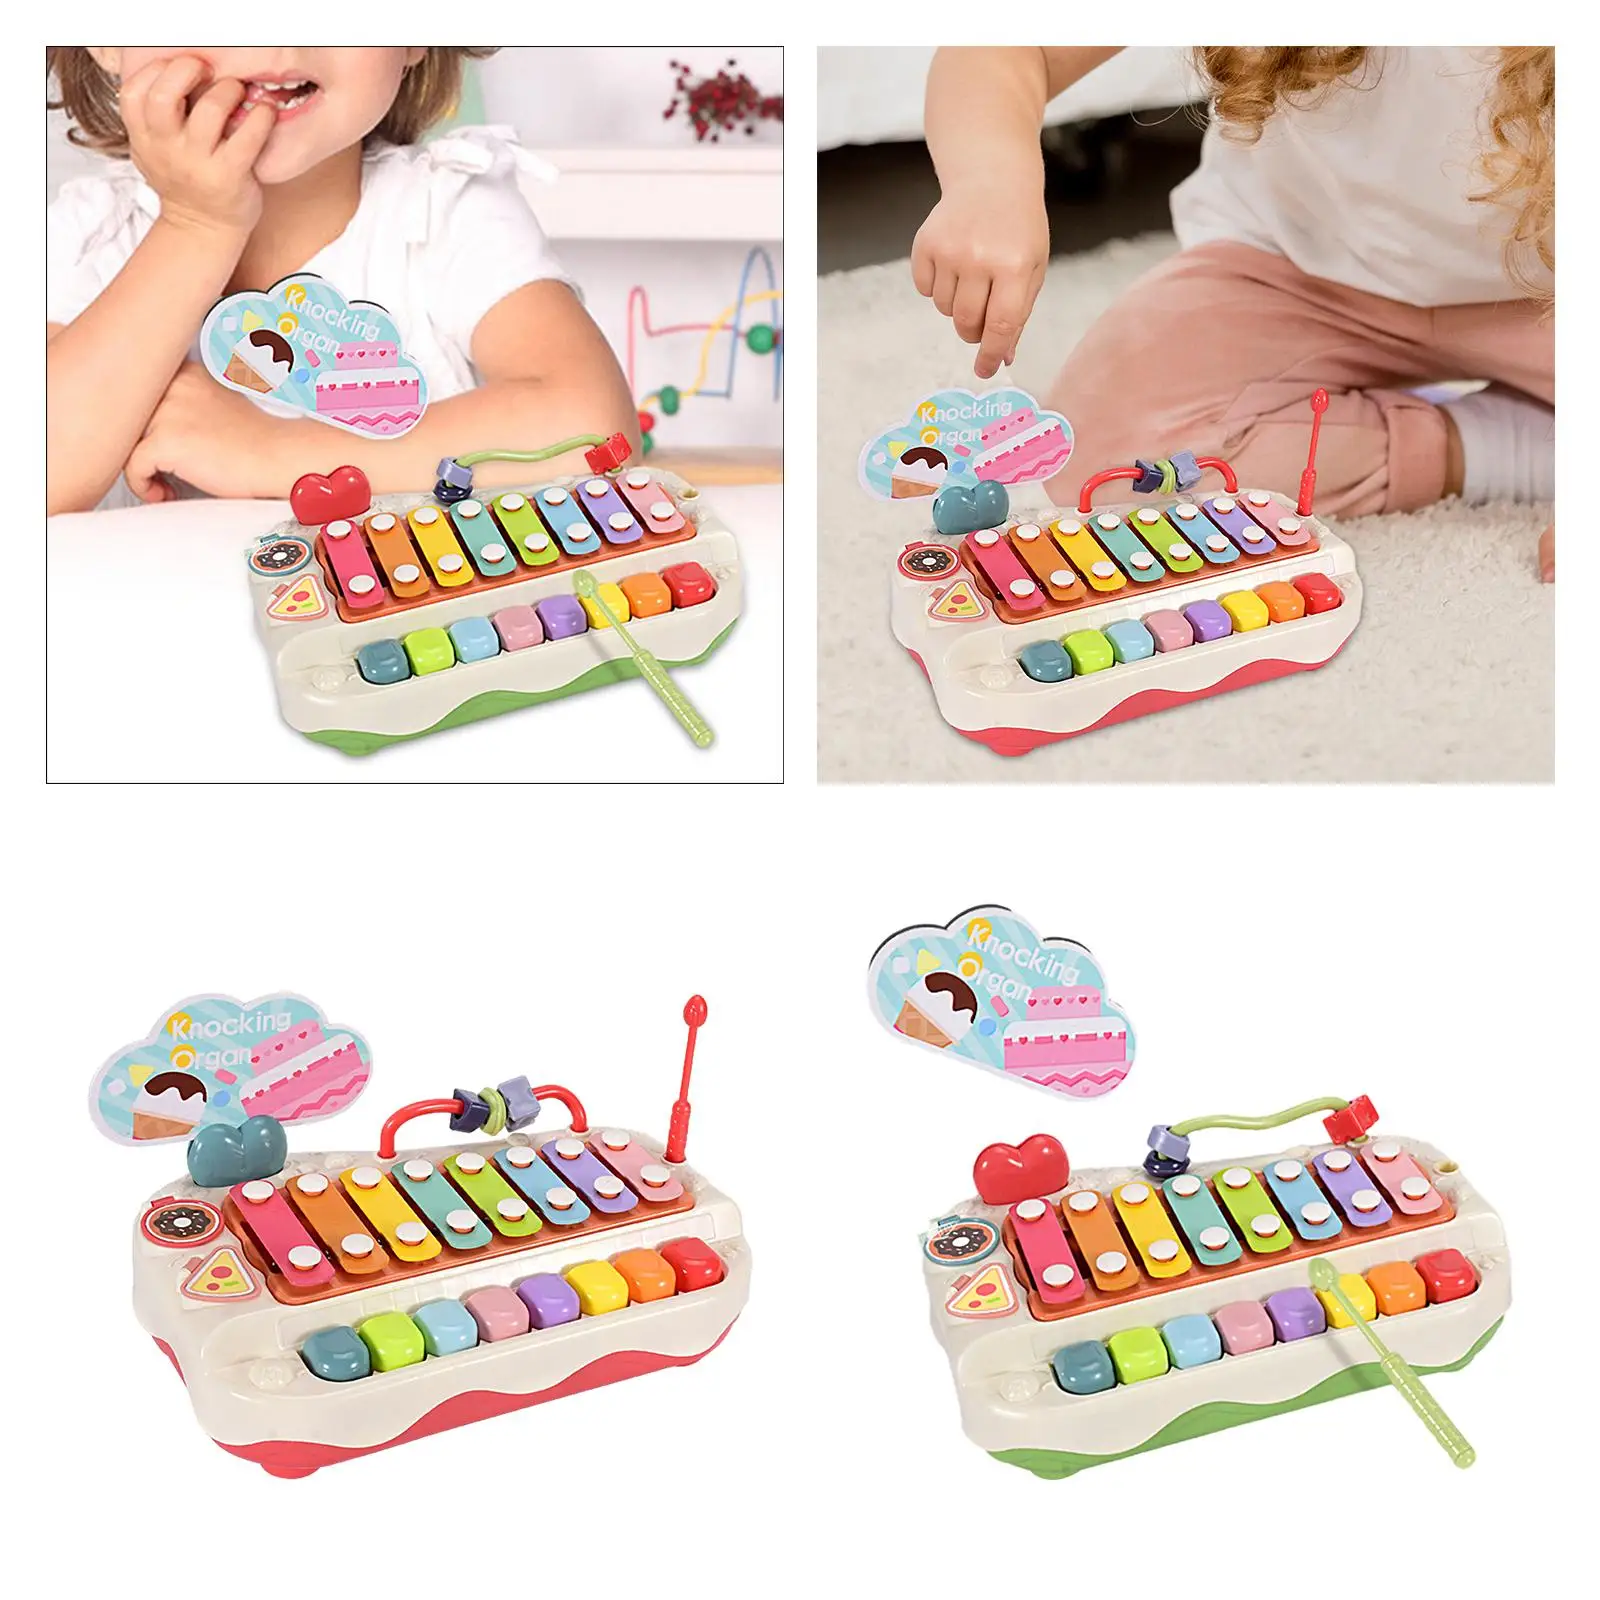 Baby Musical Toy Percussion Instrument Educational Hammering Pounding Toys for Baby Toddler 1 2 3 Years Old Kids Holiday Gifts